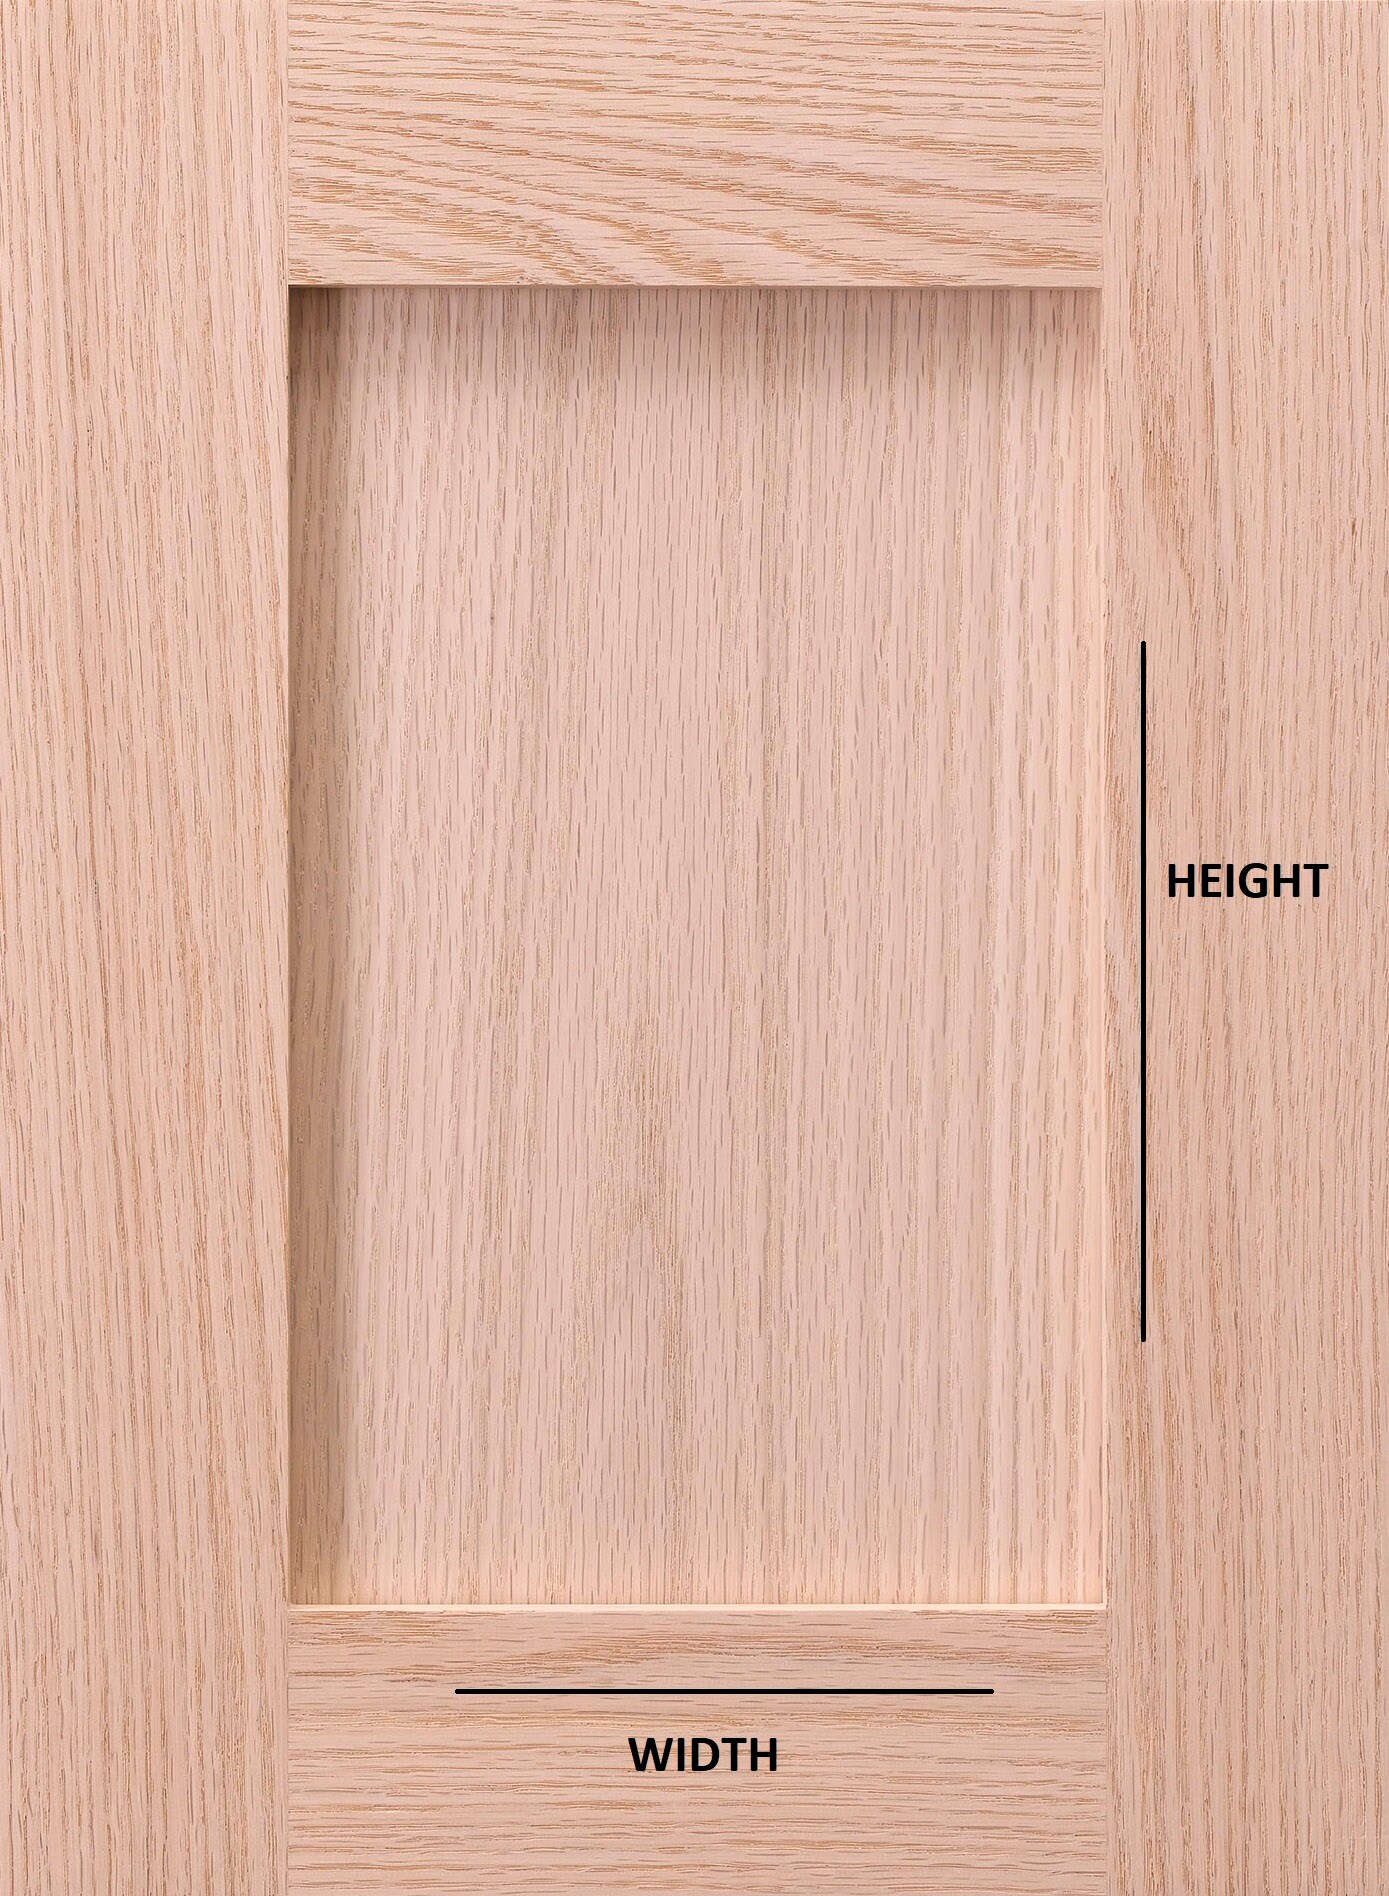 Surfaces 16-in W x 28-in H Red Oak Wall Cabinet Door (Fits 18-in x 30-in wall box)